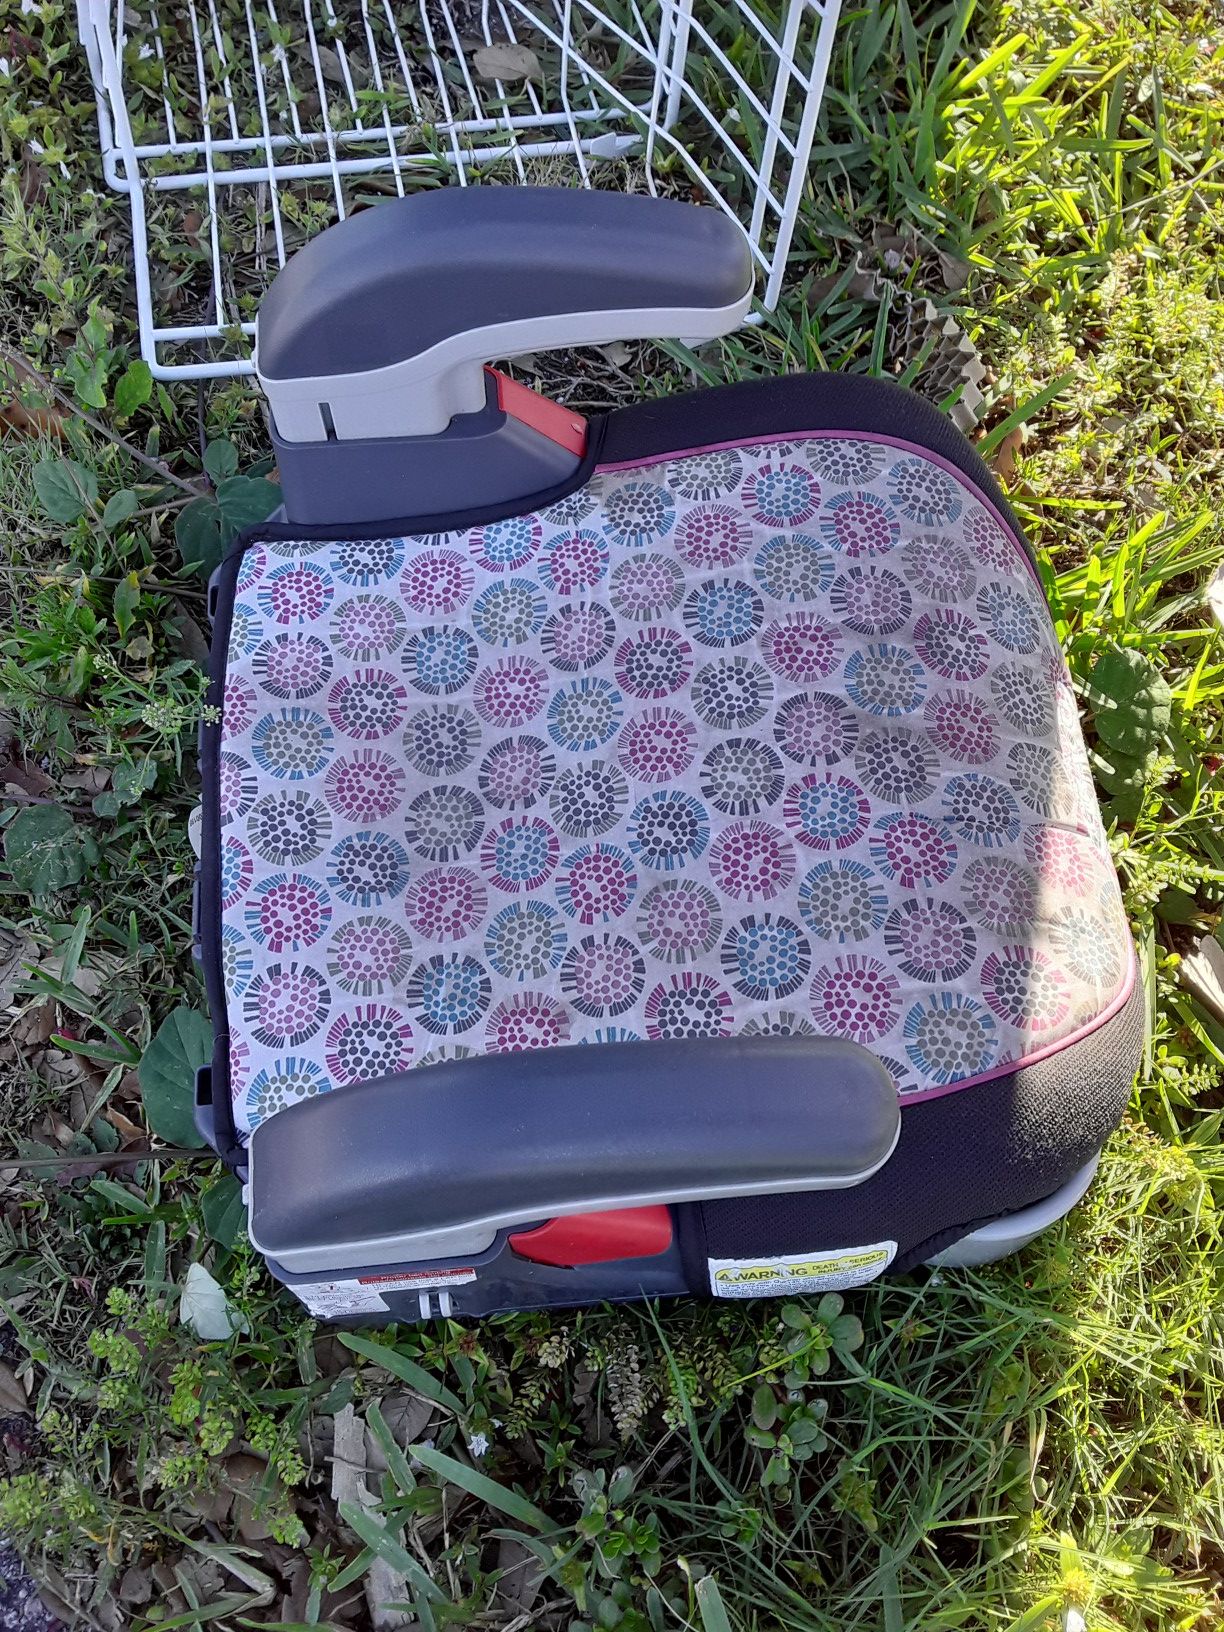 Used booster seat 25 obo 20 lowestill go